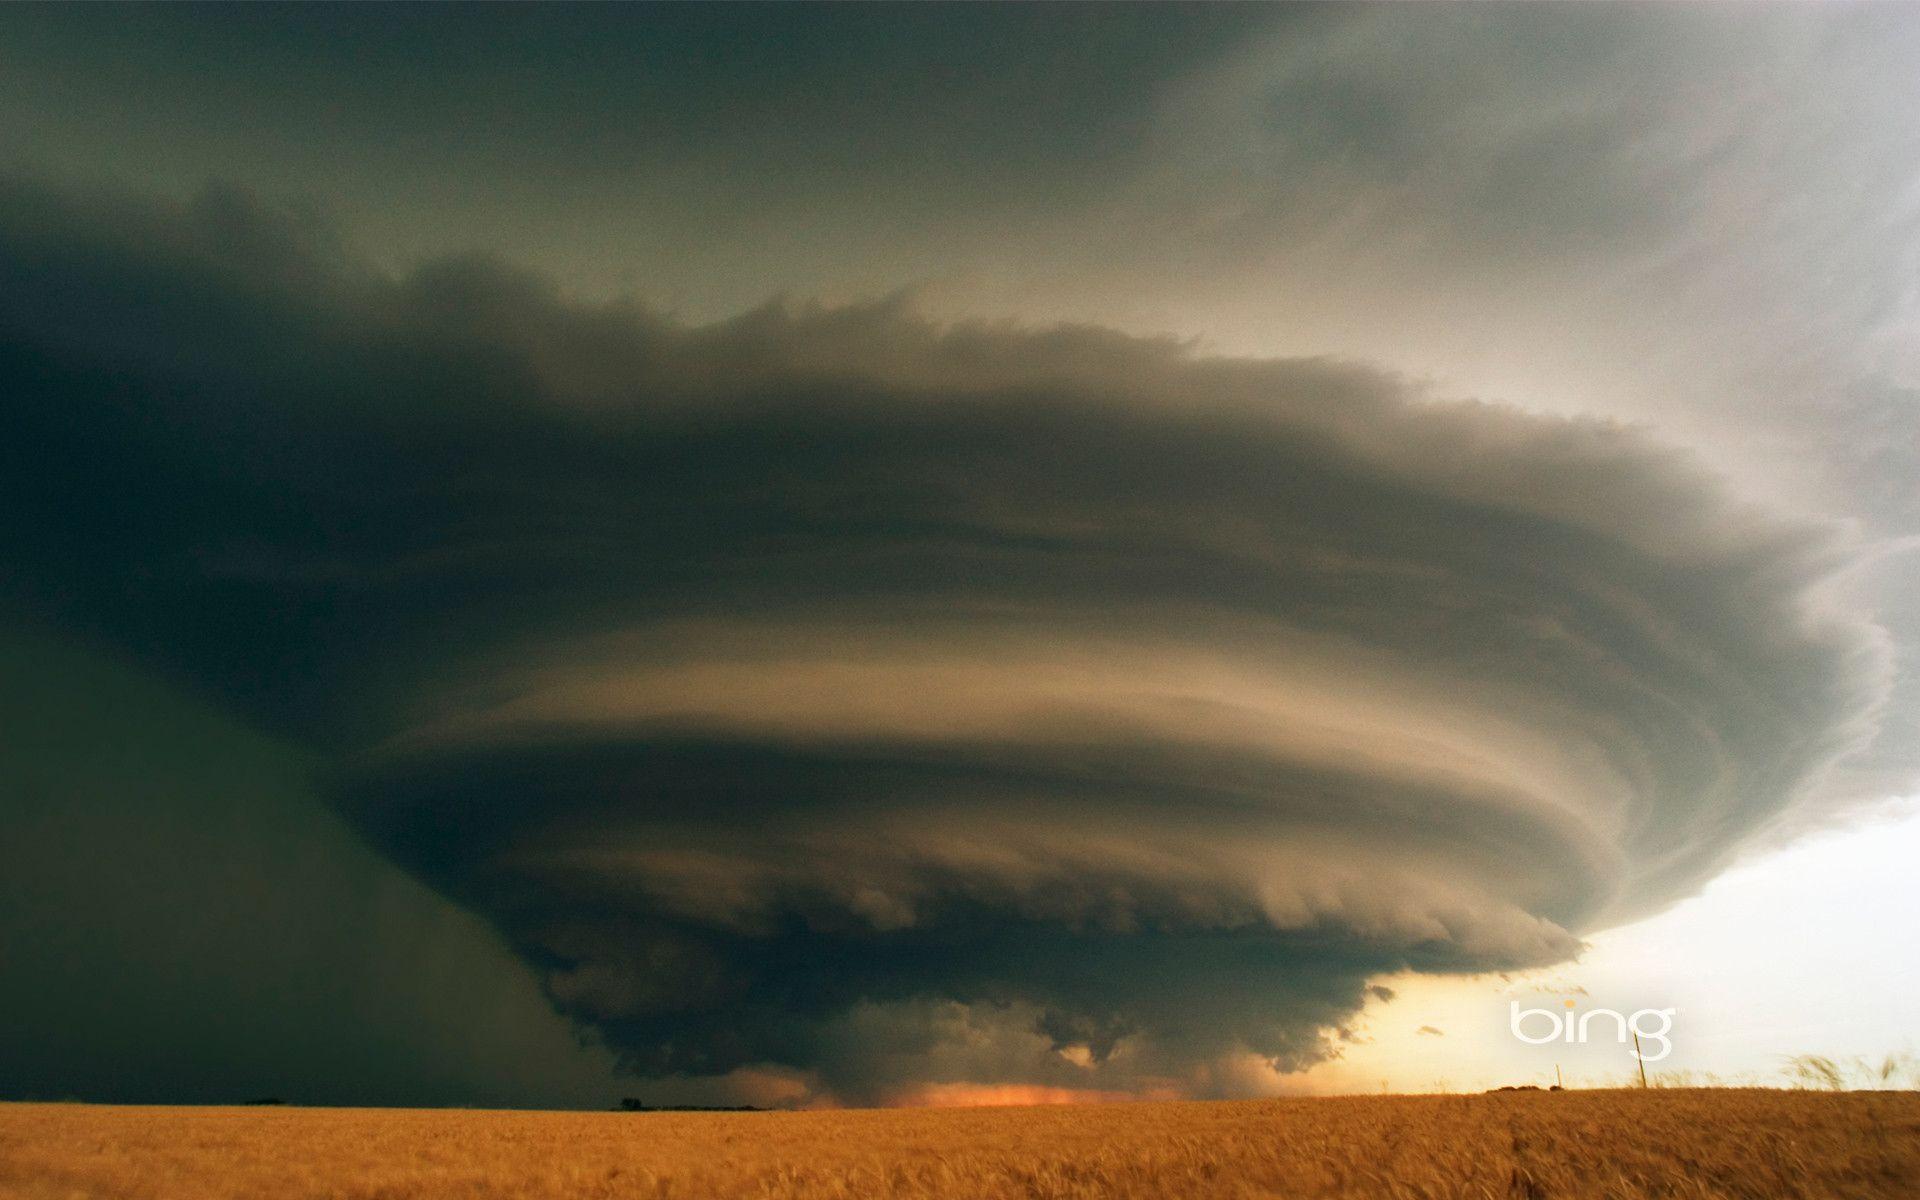 An Isolated Supercell Thunderstorm Over South Central Kansas